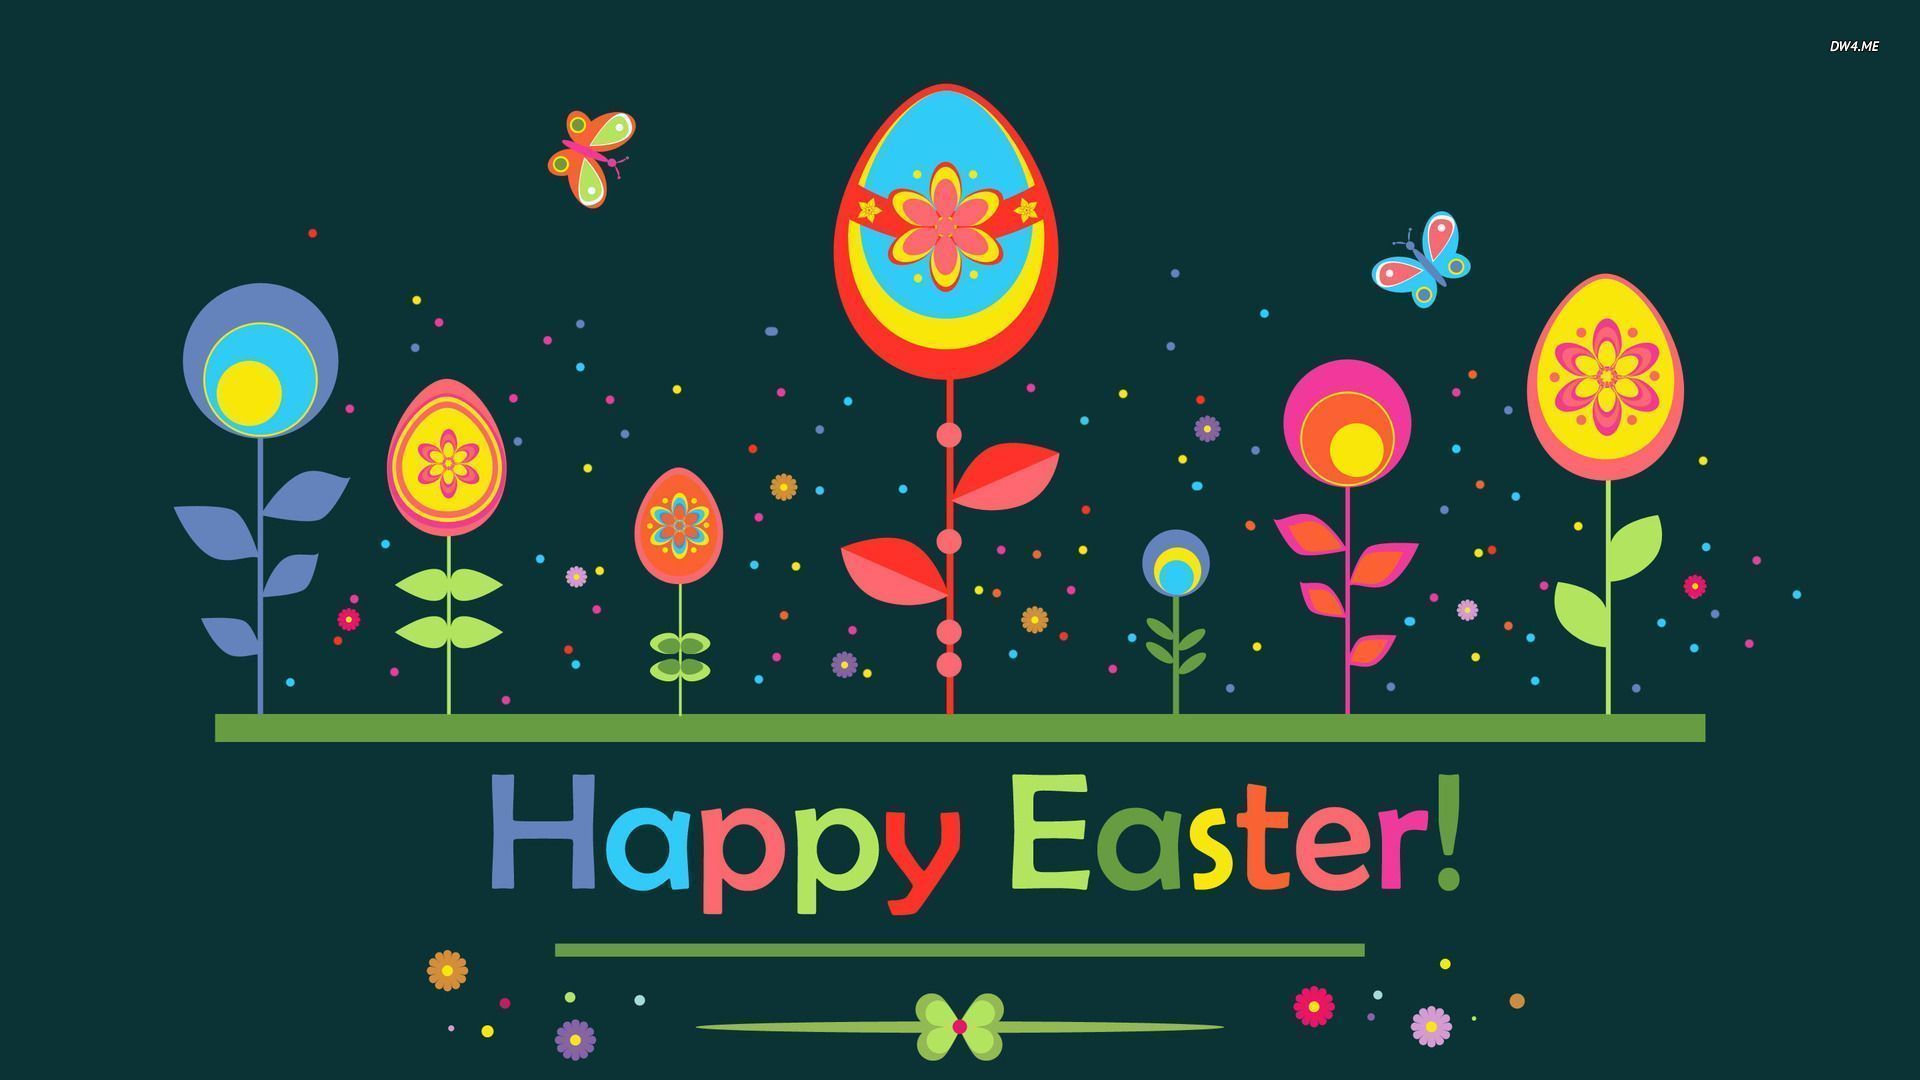 Happy Easter Images for Desktop | Wallpapers, Backgrounds, Images ...